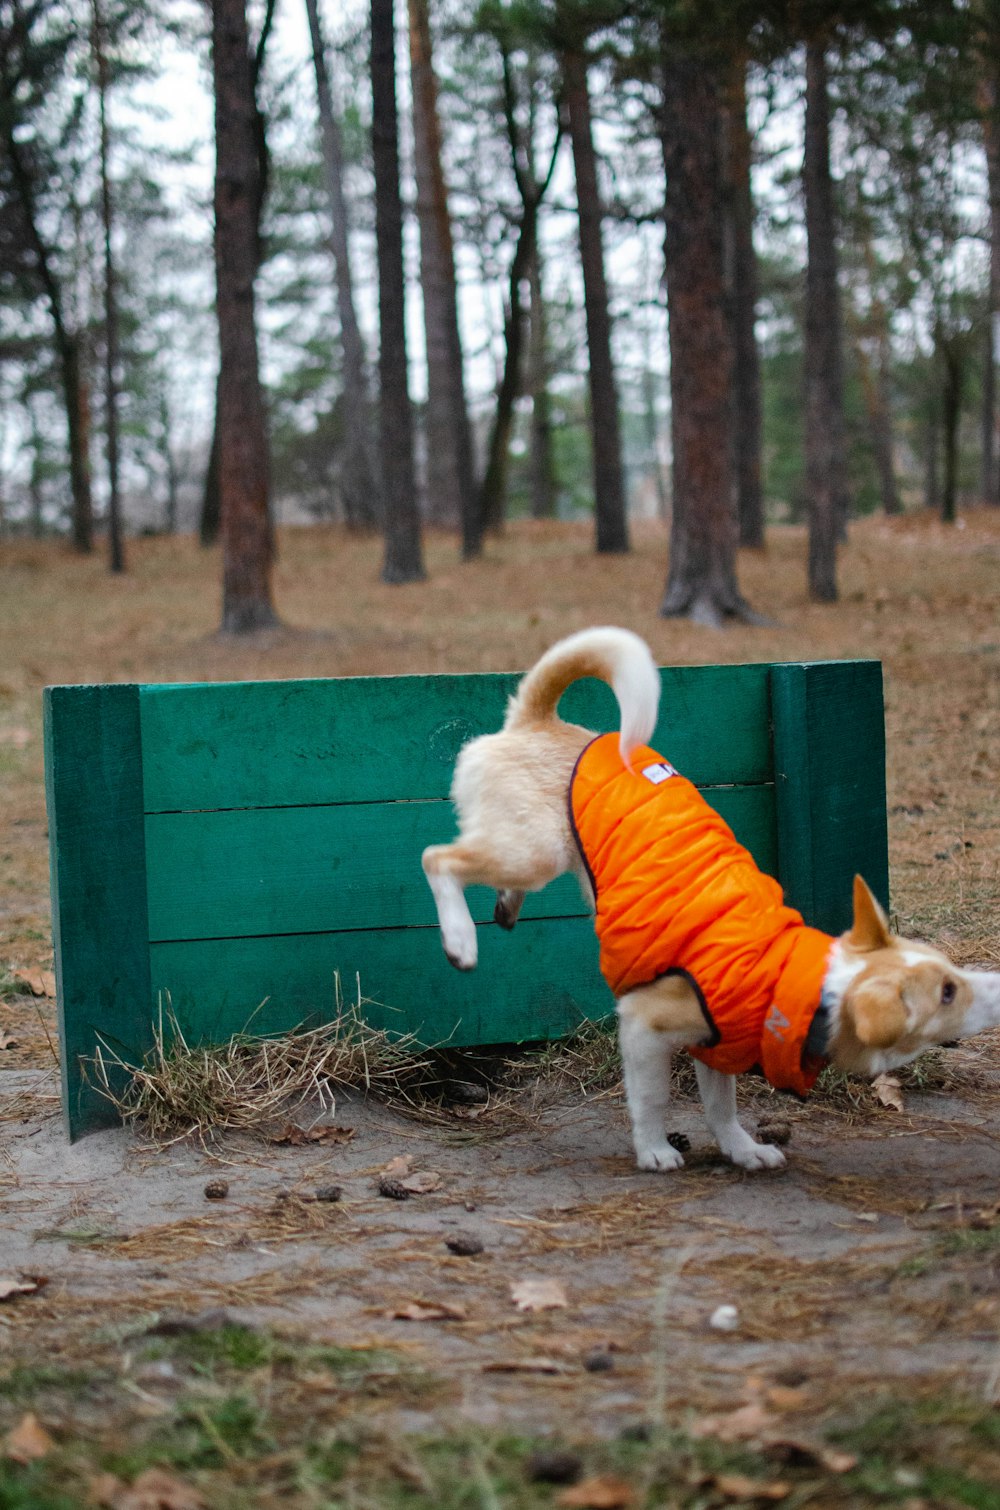 a small dog in an orange shirt playing with another dog